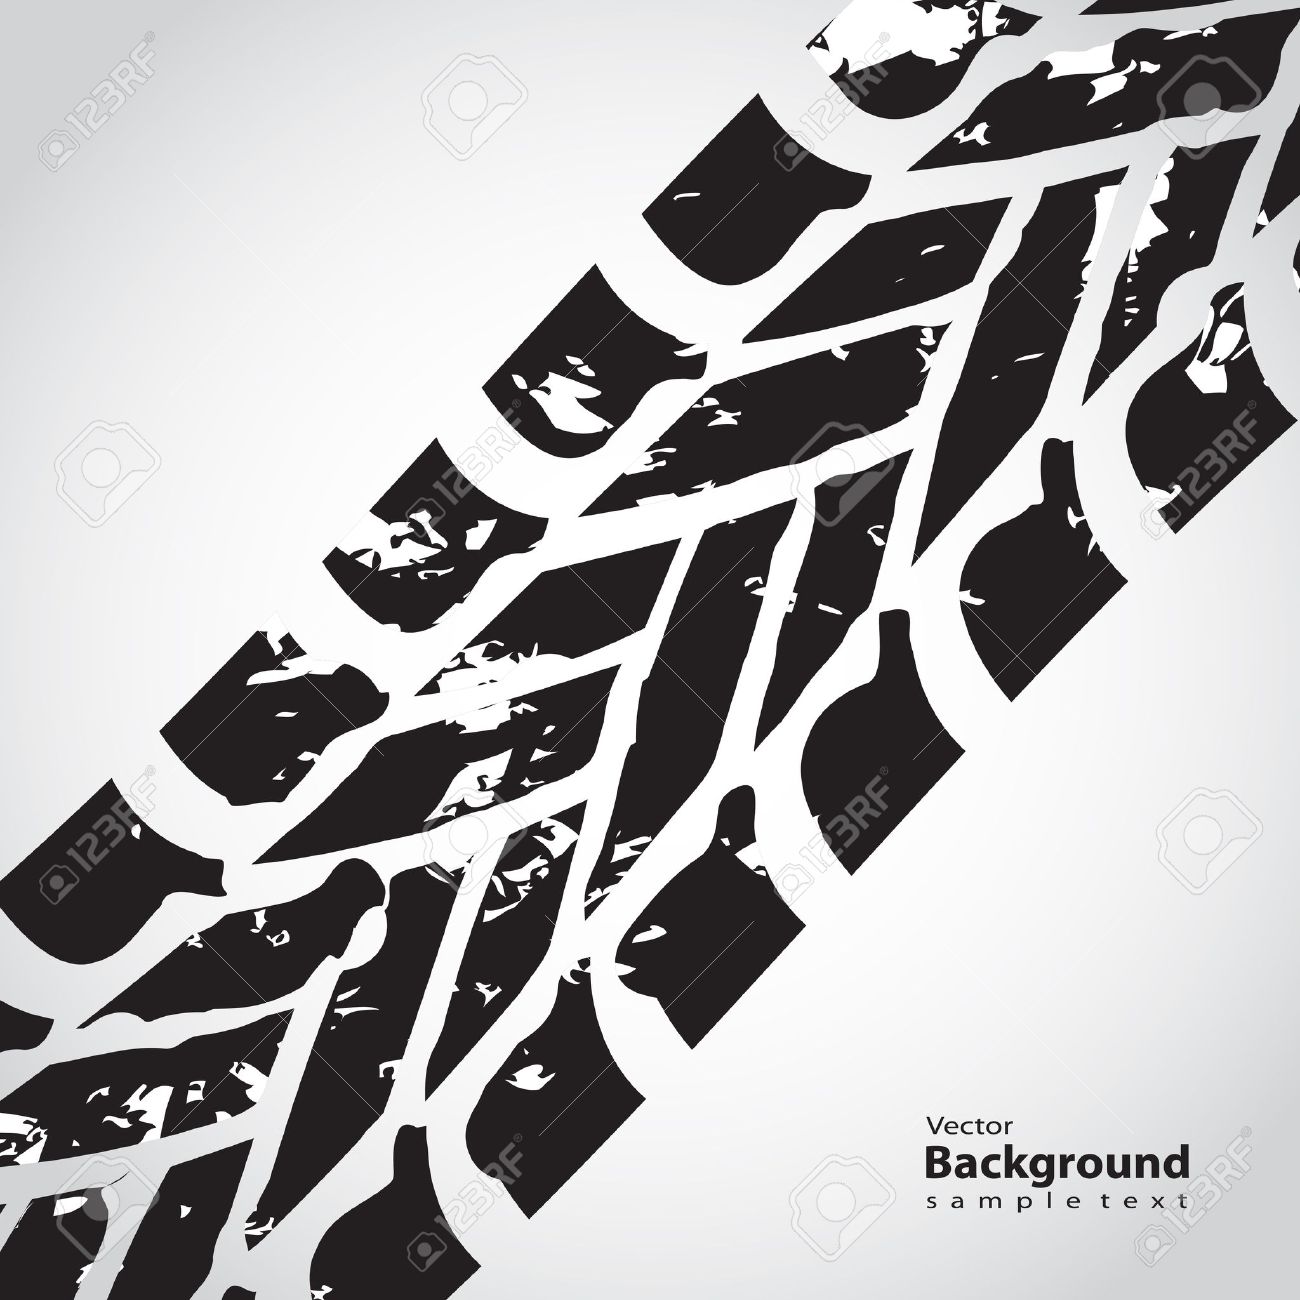 Stock Images Tire Tracks